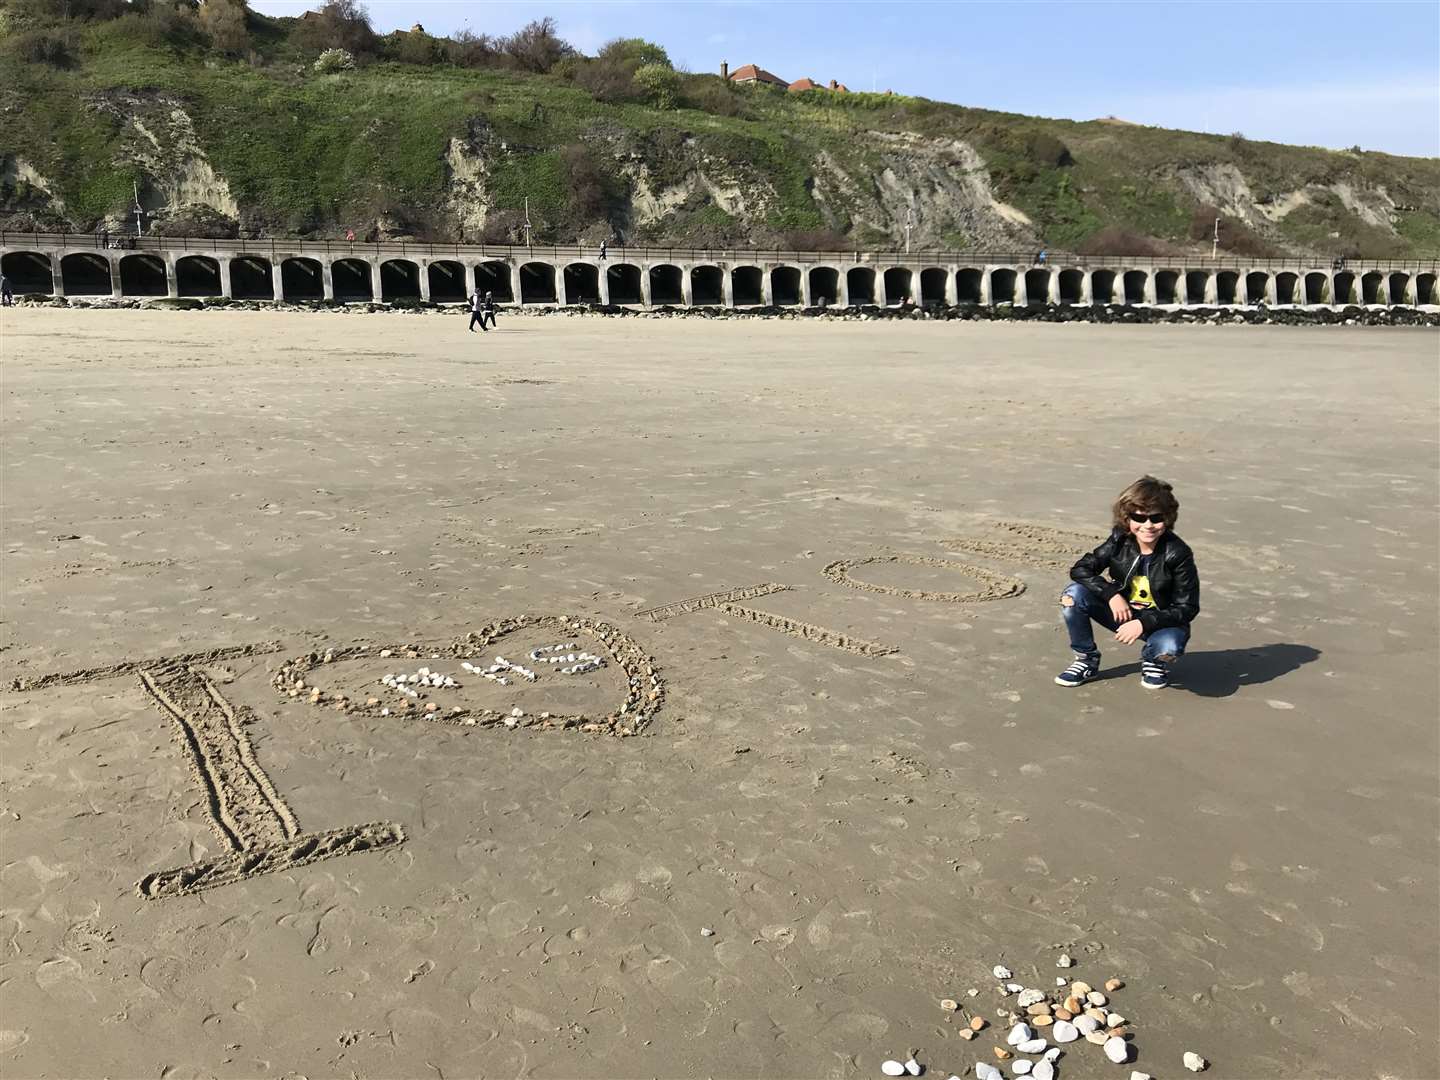 Part of Andrei's birthday message was written in the sand